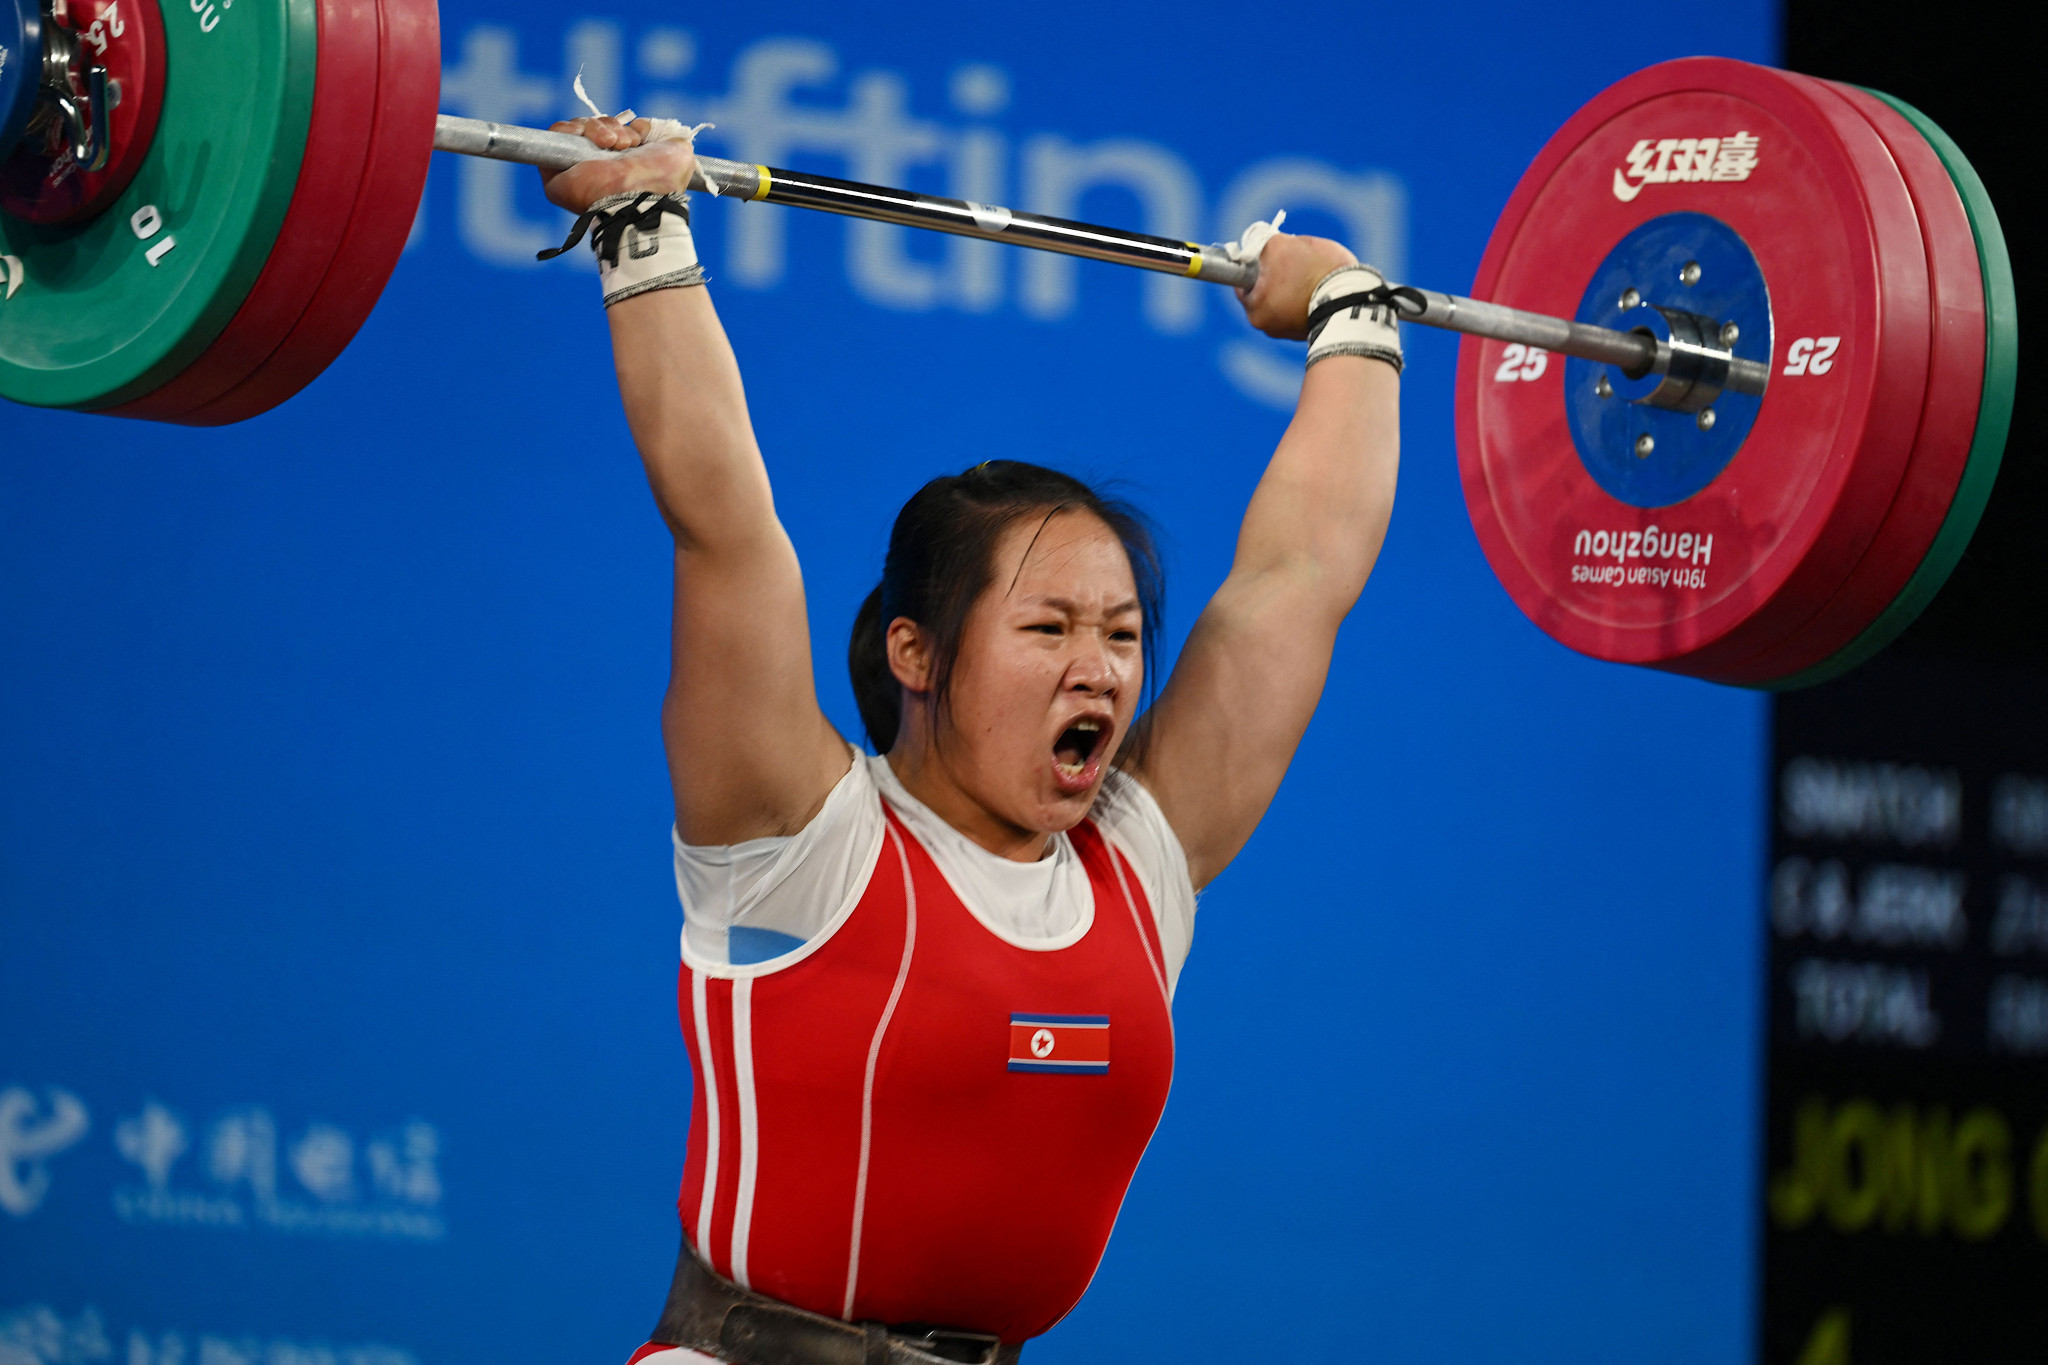 North Korea has finished top of the weightlifting medals table at the Asian Games for the second time in succession ©Getty Images